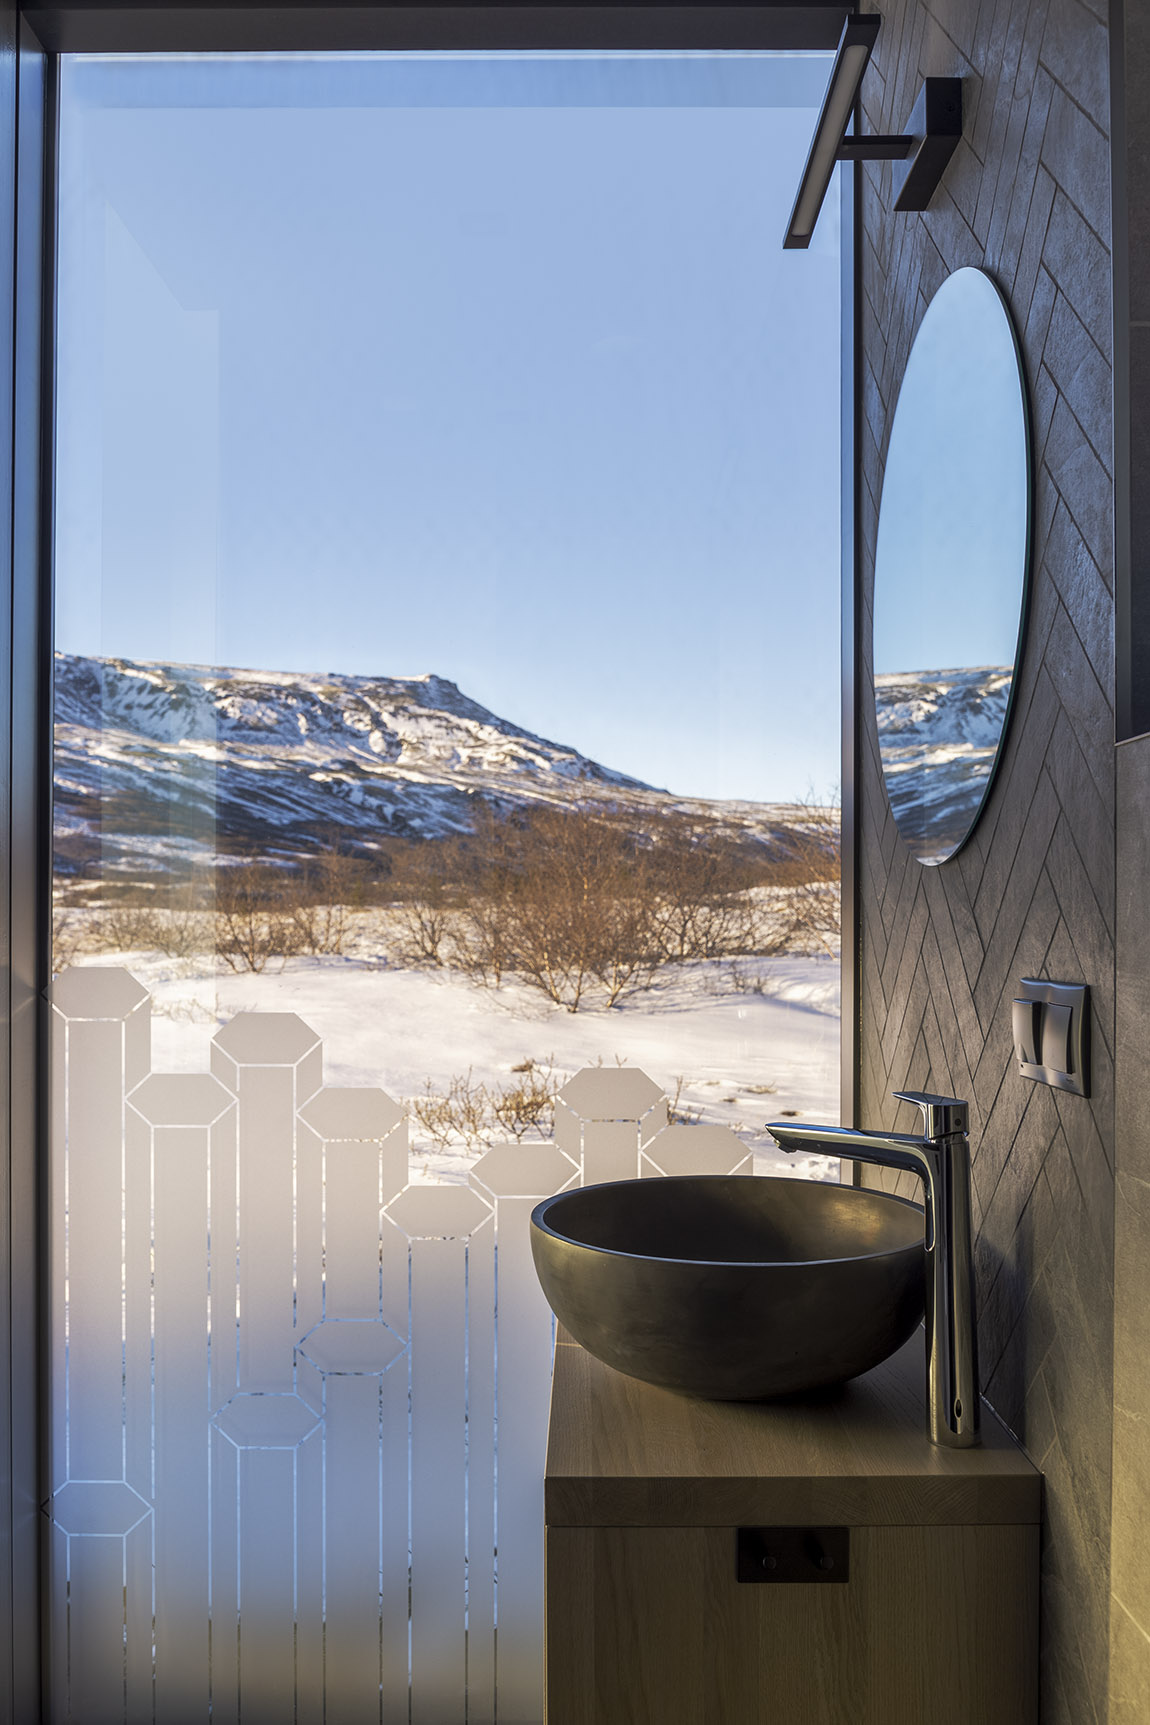 Mirror Lodge Iceland: A night under the stars of Iceland